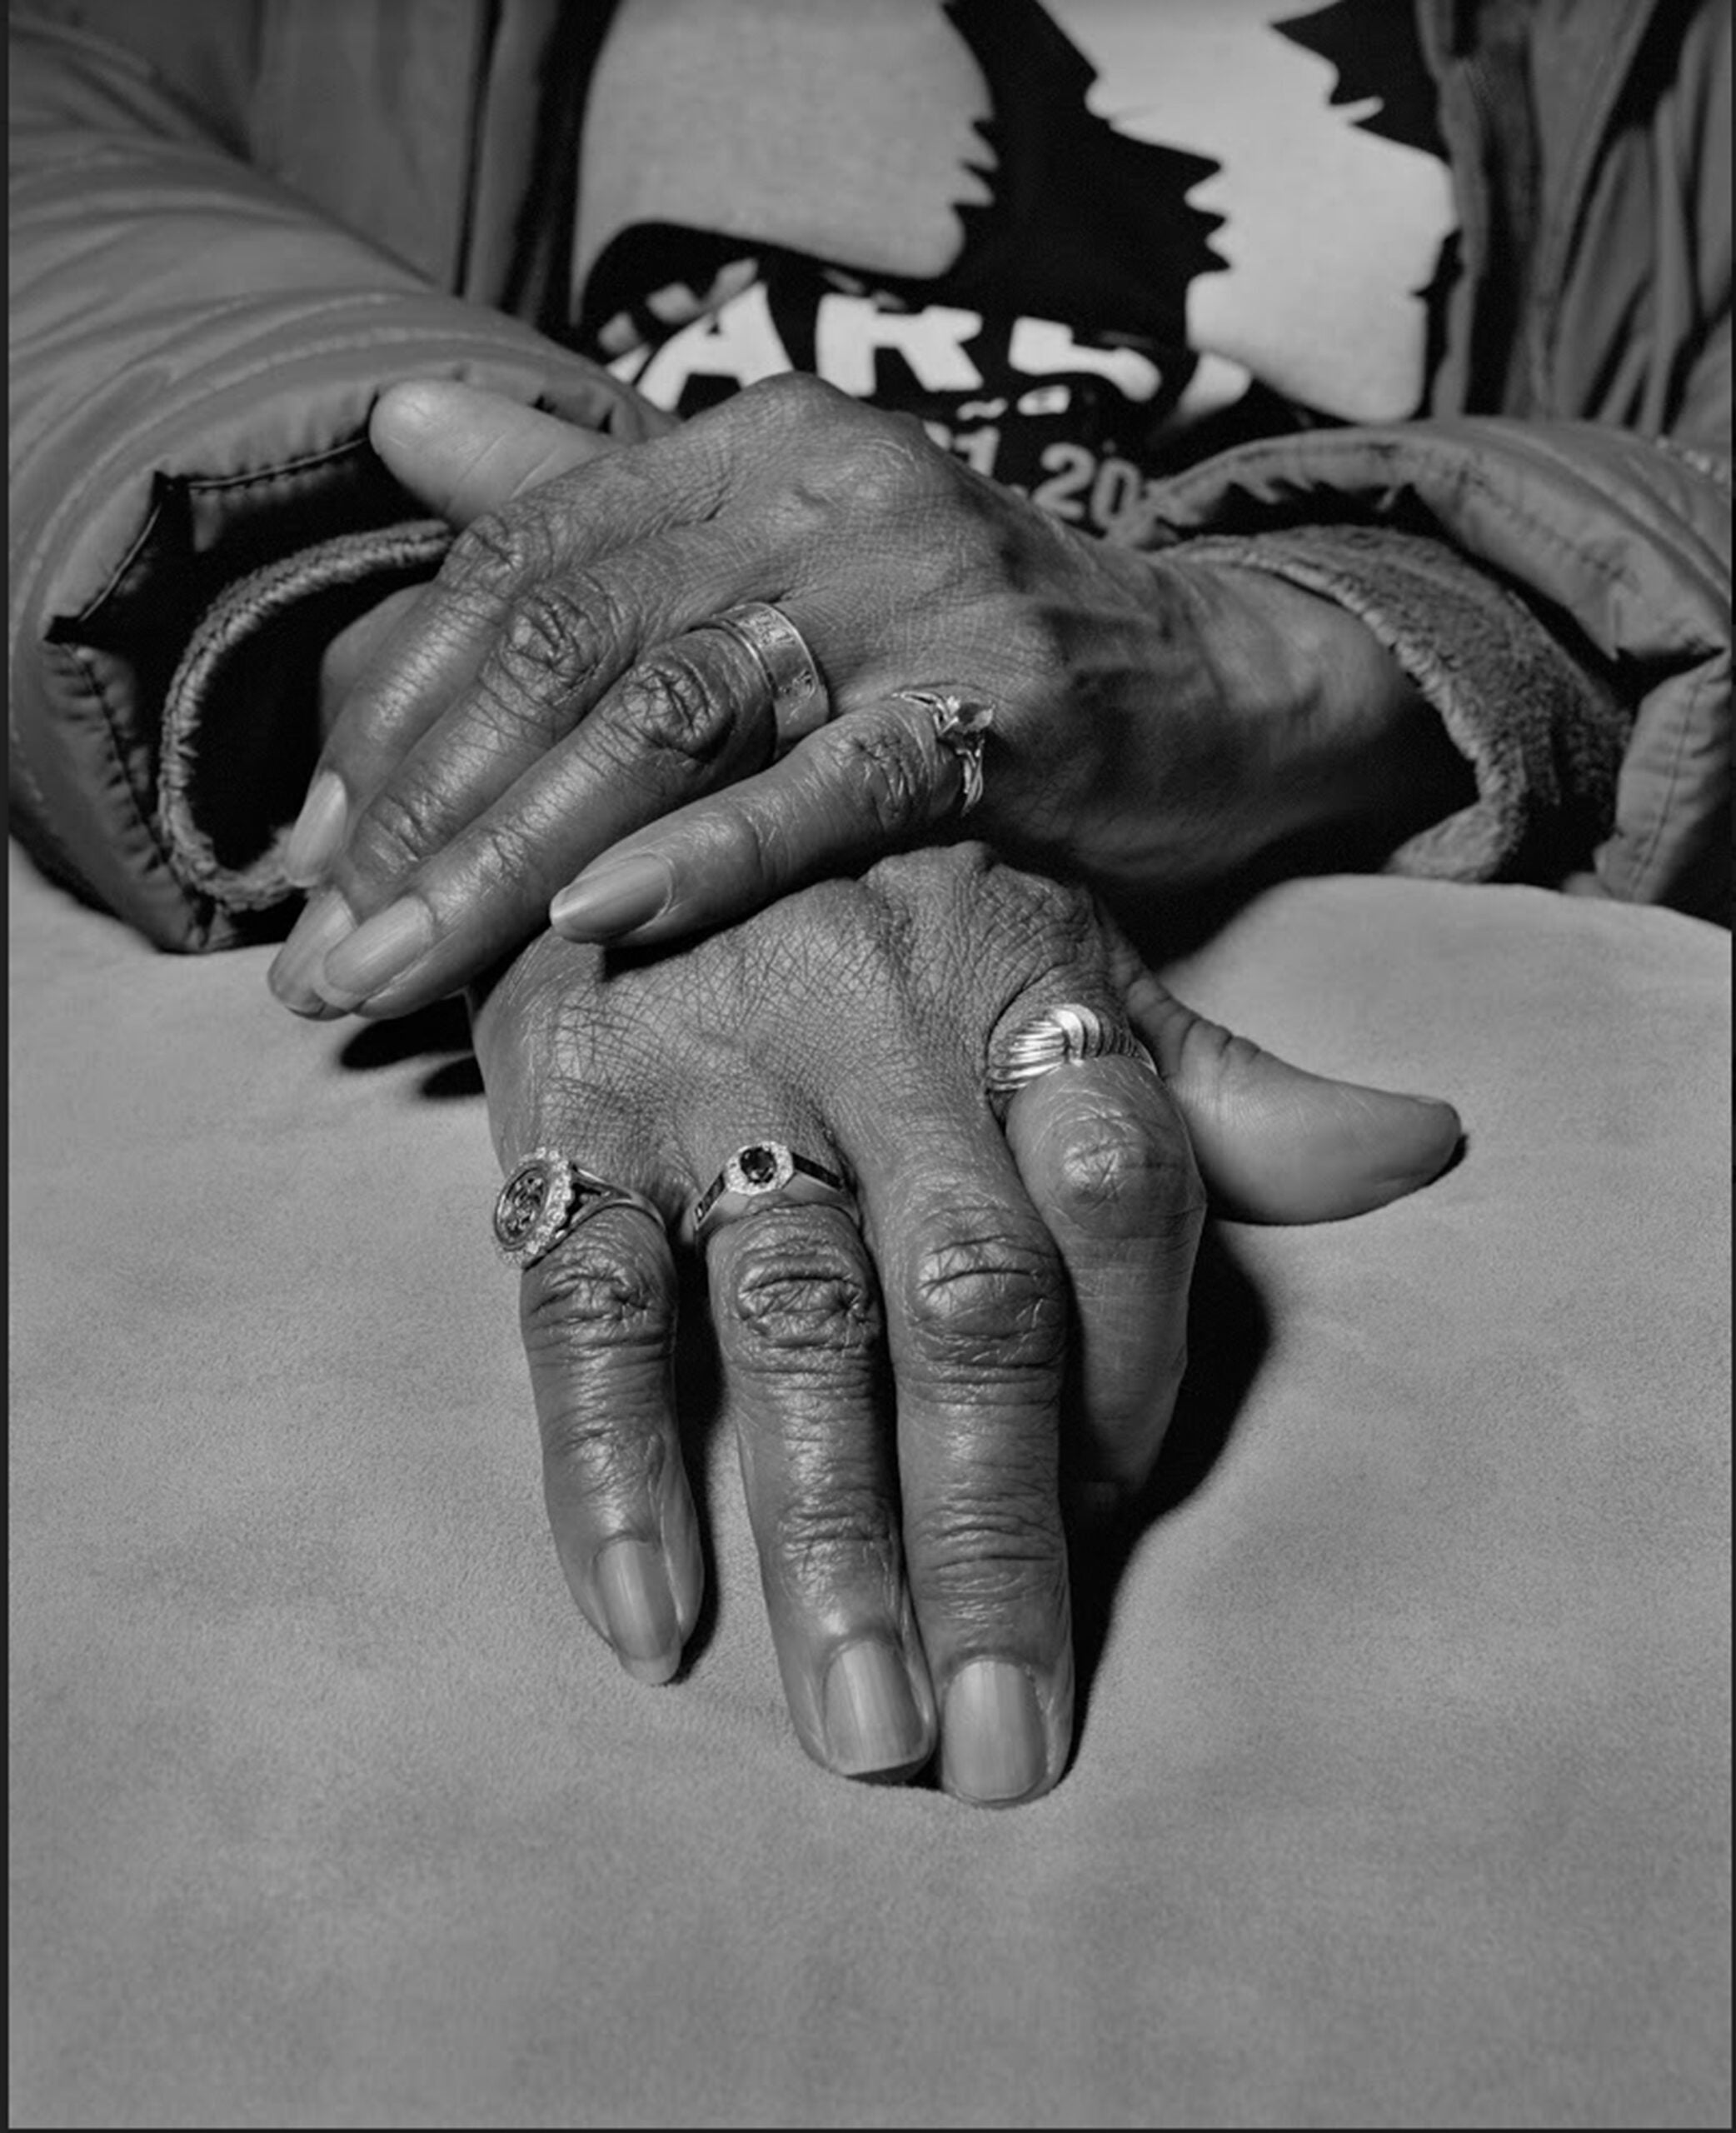 “Marilyn Moore, UAW Local 1112, Women’s Committee and Retiree Executive Board, with her General Motors company retirement gold ring on her index finger, Youngstown, Ohio, 2019” by LaToya Ruby Frazier. Gelatin silver print, 60 x 48 inches.